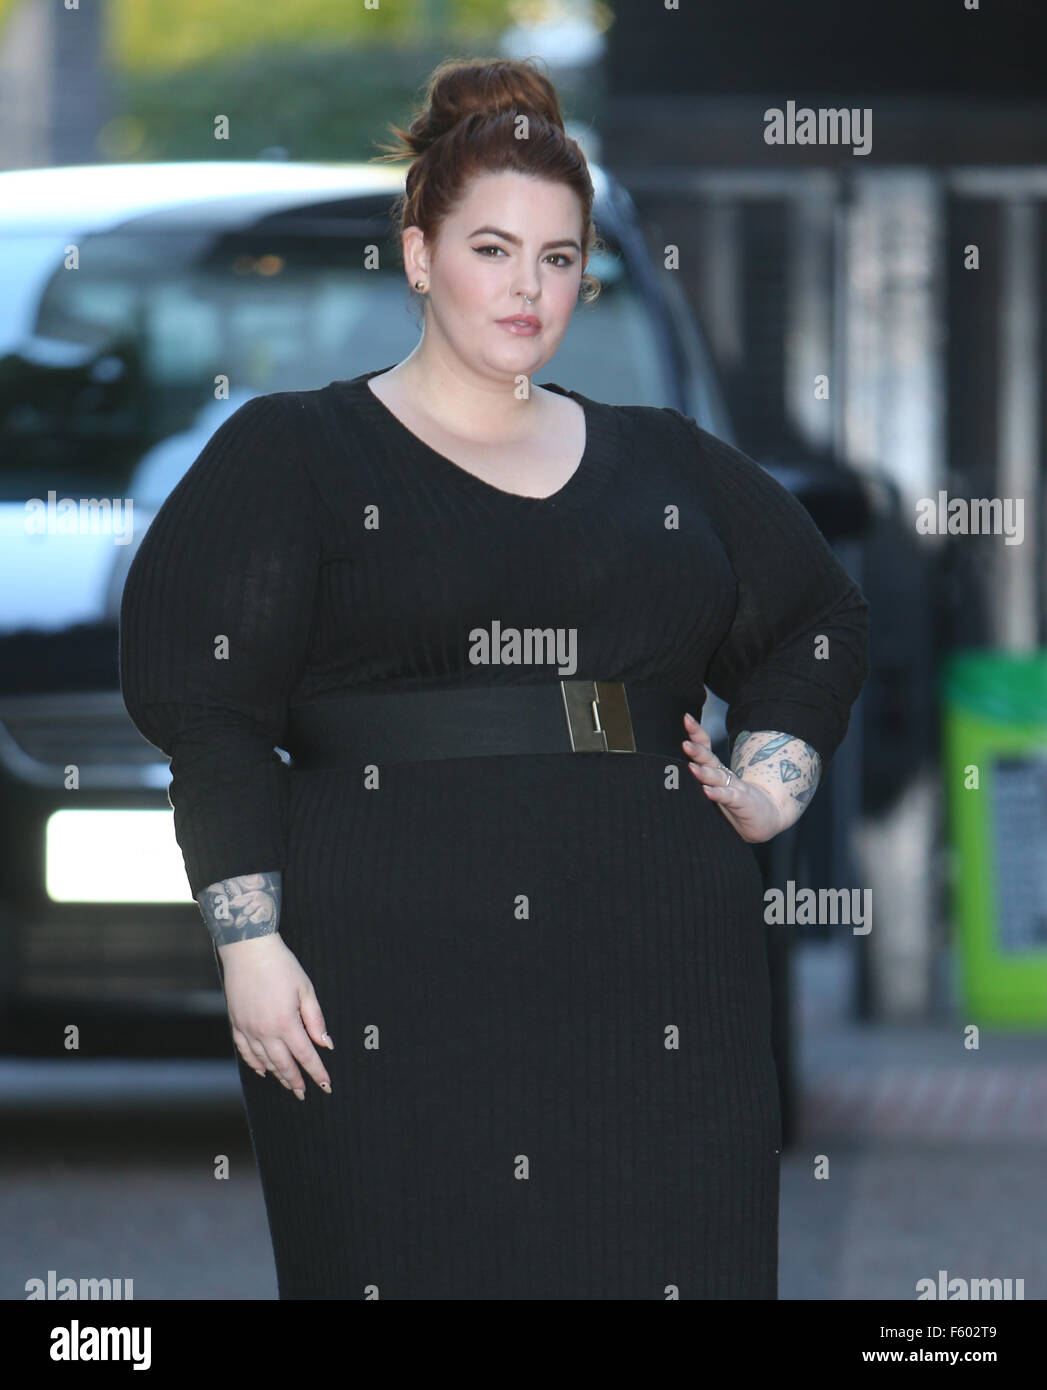 Tess holliday hi-res stock photography and images - Alamy